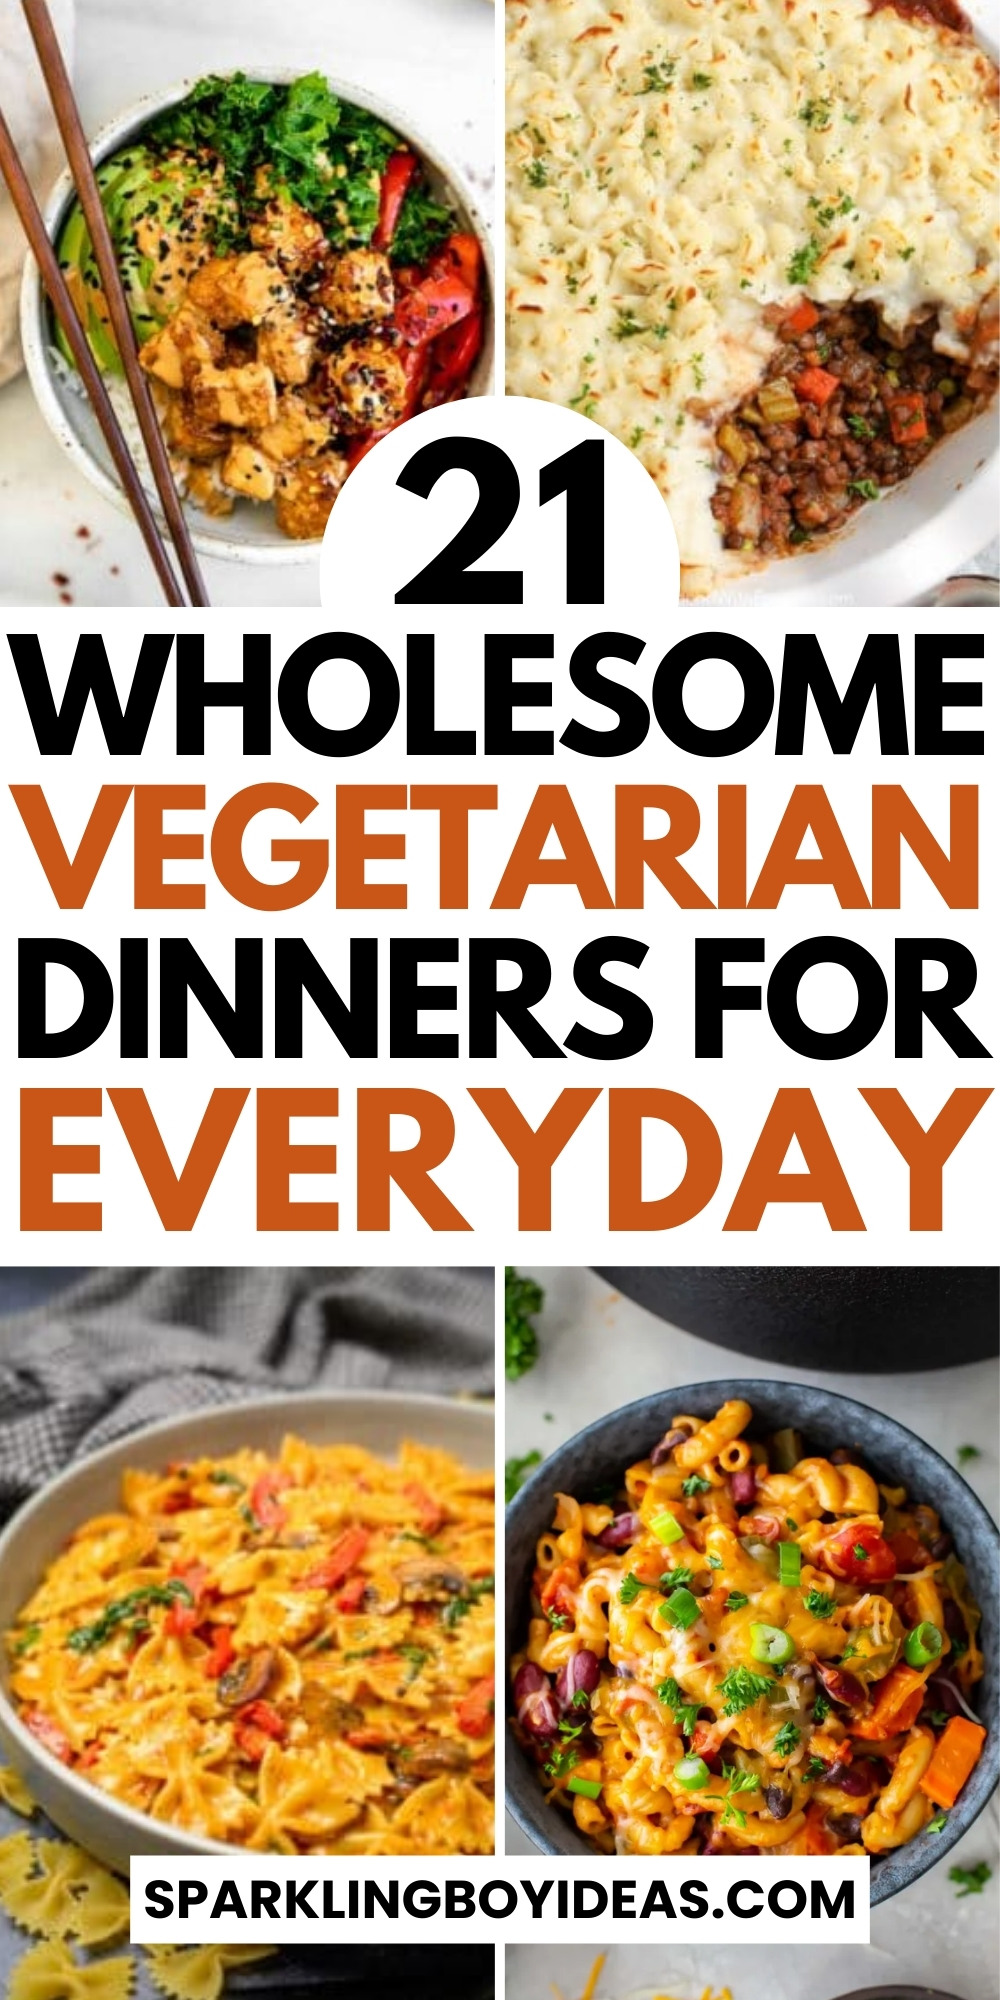 21 Quick And Easy Vegetarian Dinner Recipes - Sparkling Boy Ideas